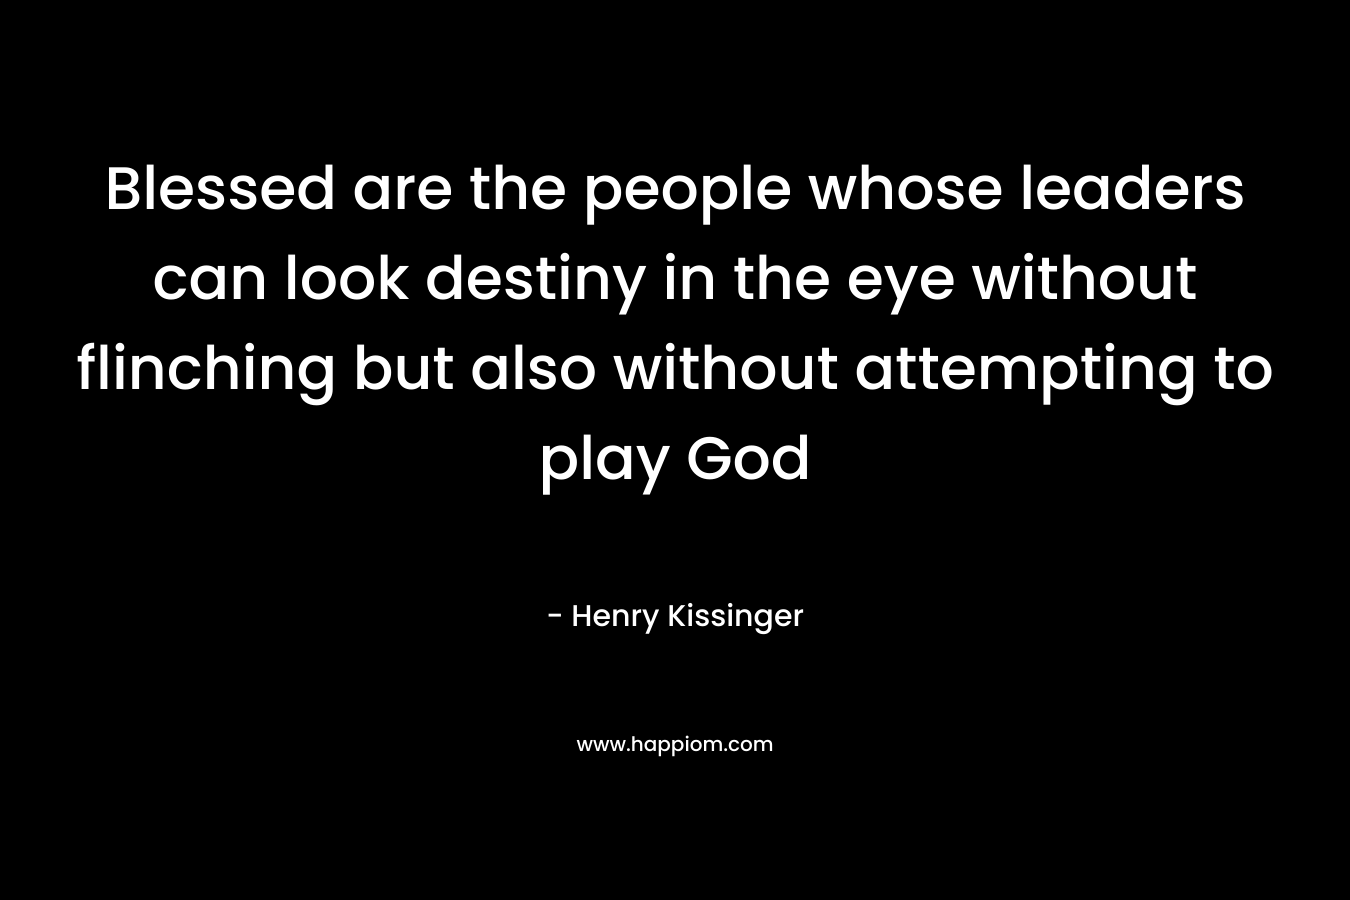 Blessed are the people whose leaders can look destiny in the eye without flinching but also without attempting to play God – Henry Kissinger